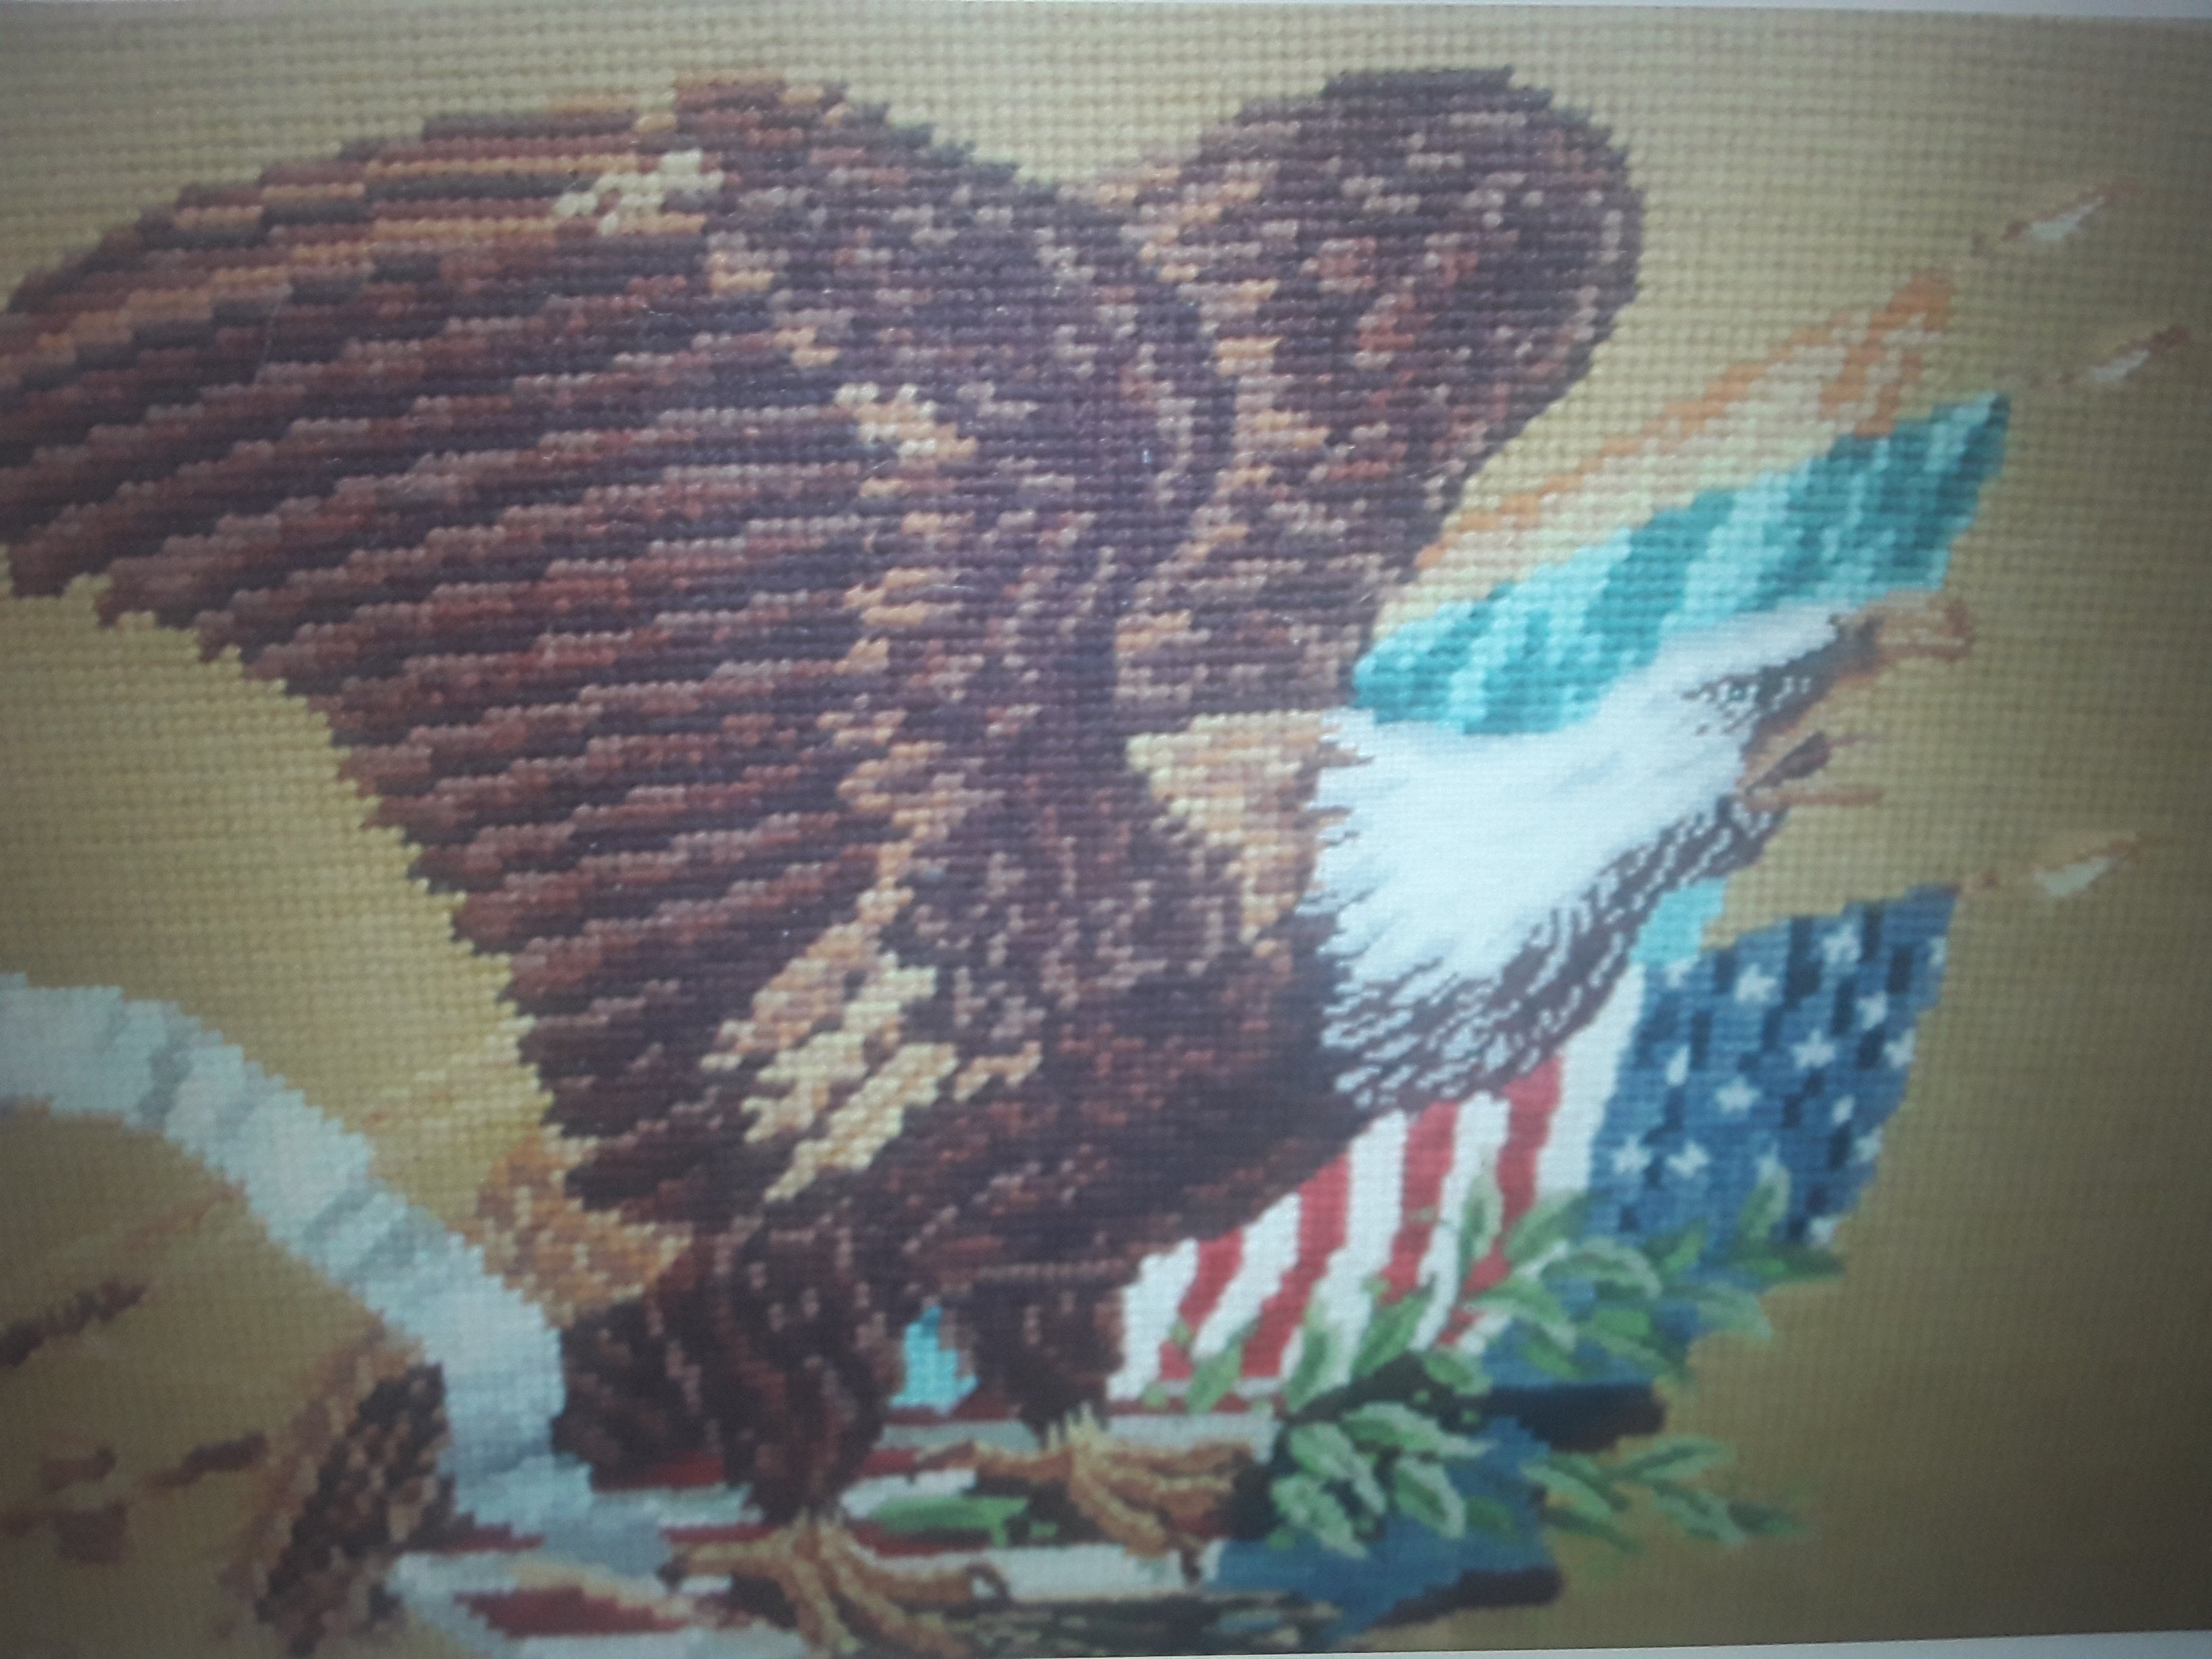 1940's Vintage Spectacular Hand Stitched Needlepoint Patrioti Scene. Eagle in flight with ribbon, USA flag detail.